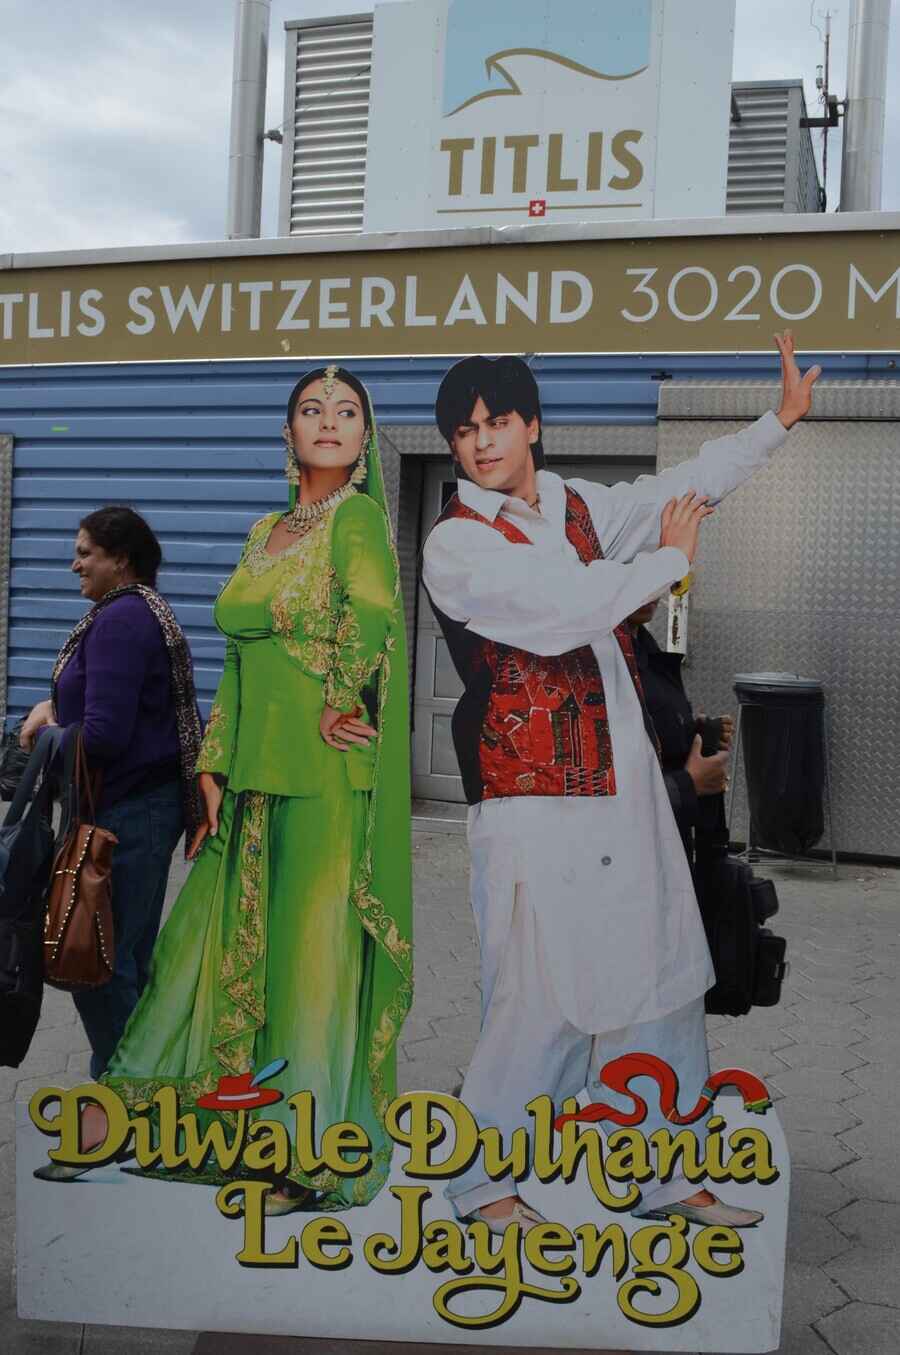 Pose with SRK and Kajol at Mount Titlis: Switzerland has been the ultimate dreamy backdrop for a generation of Bollywood romances, and none as popular as ‘Dilwale Dulhania Le Jayenge’. The iconic moments of Kajol and SRK frolicking in the snow draw many to Titlis. Waiting on arrival is a life-size cutout of the film’s stars. It’s moved to different spots around the cafe and deck, so locate it and strike a pose. PS: Don't miss the signage in Hindi for desi visitors.